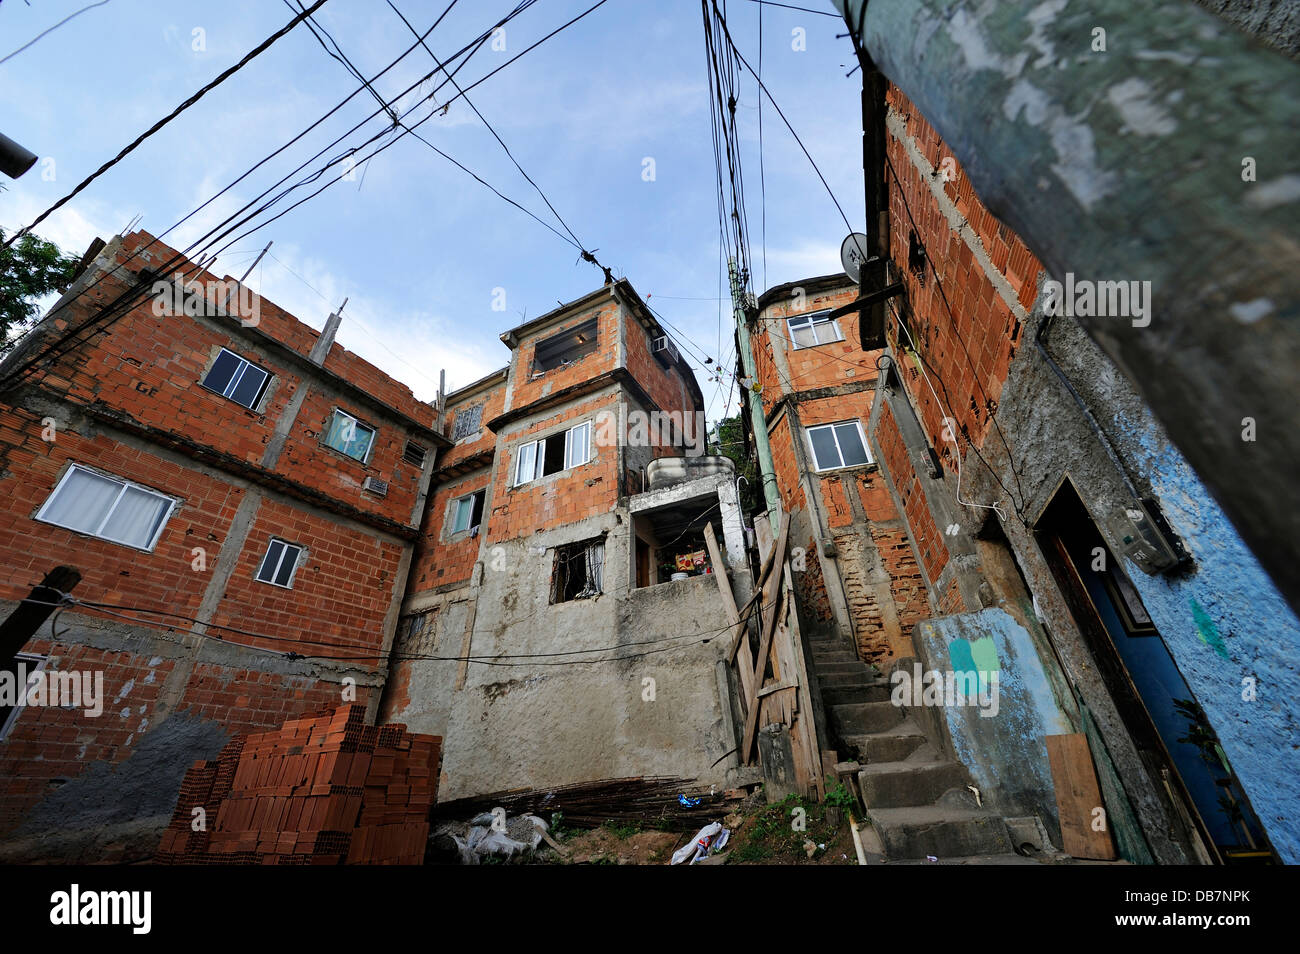 Uncontrolled construction growth, vertical growth, in a slum Stock Photo